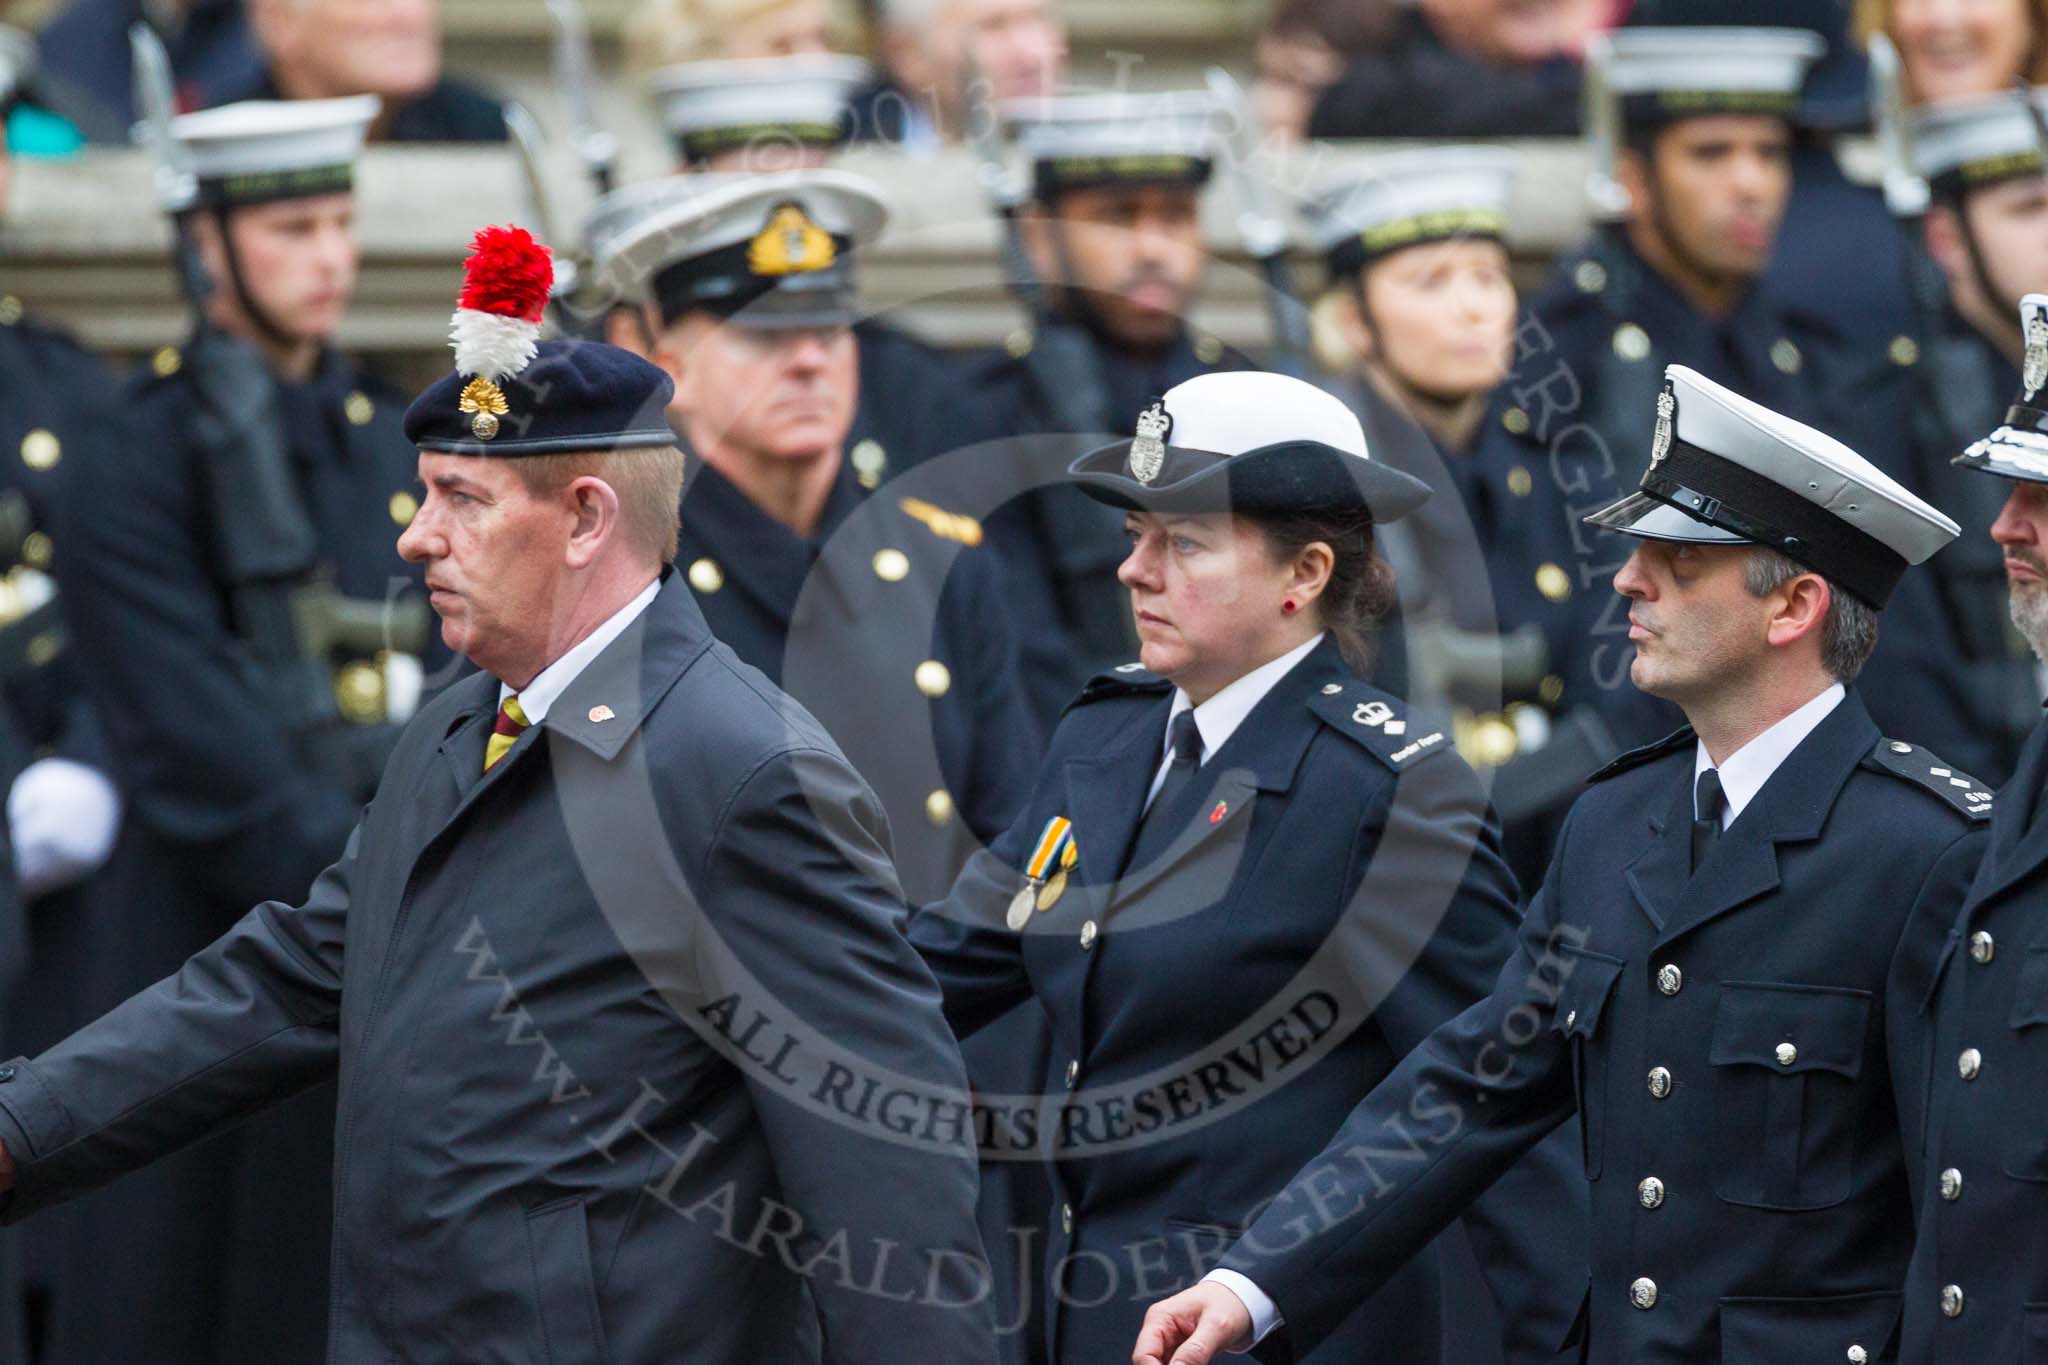 Remembrance Sunday at the Cenotaph 2015: If you know which group is shown here, please email cenotaph@haraldjoergens.com.
Cenotaph, Whitehall, London SW1,
London,
Greater London,
United Kingdom,
on 08 November 2015 at 12:21, image #1757